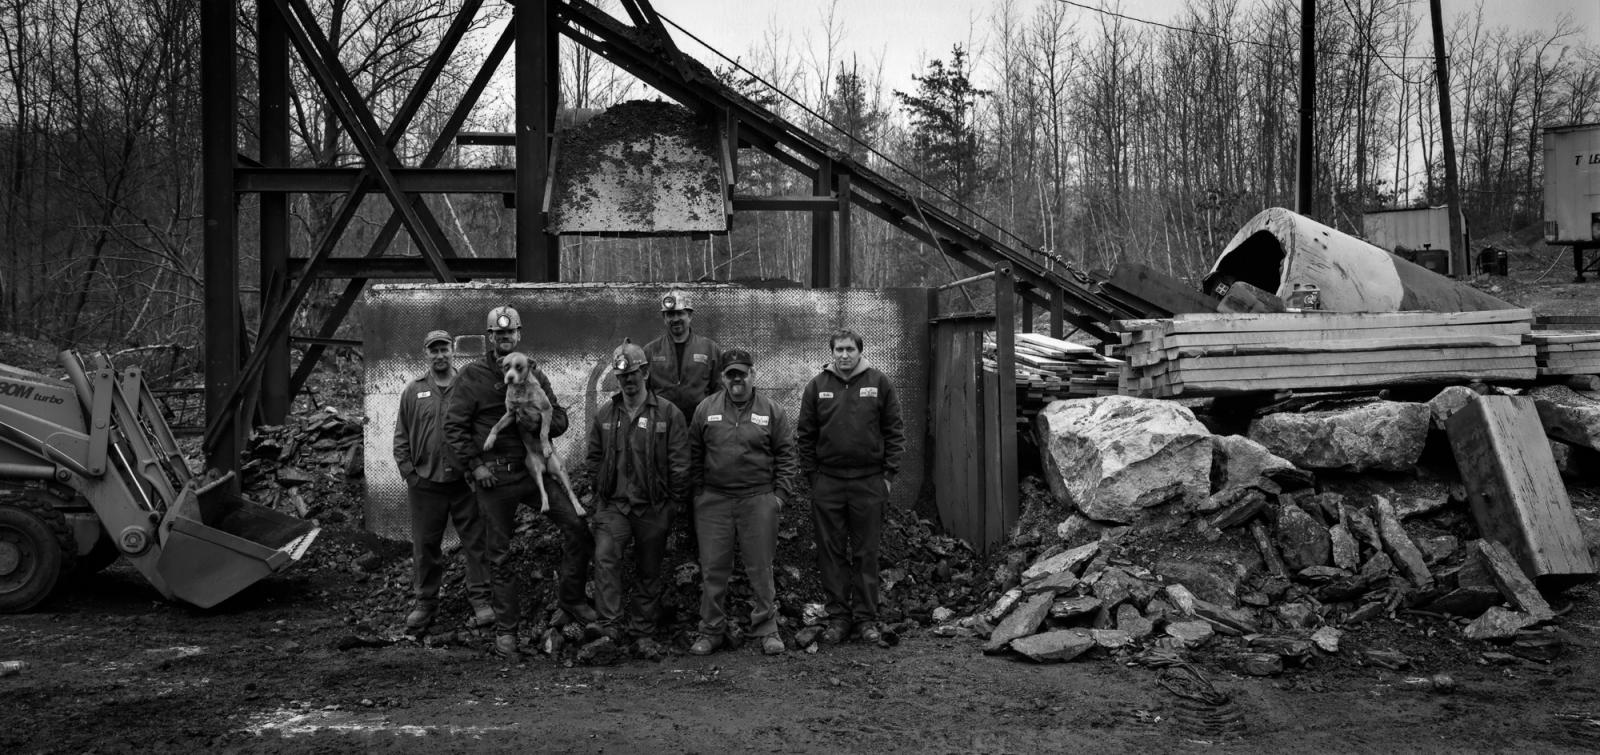 The Portraits -   Little Buck Mine crew with dog  